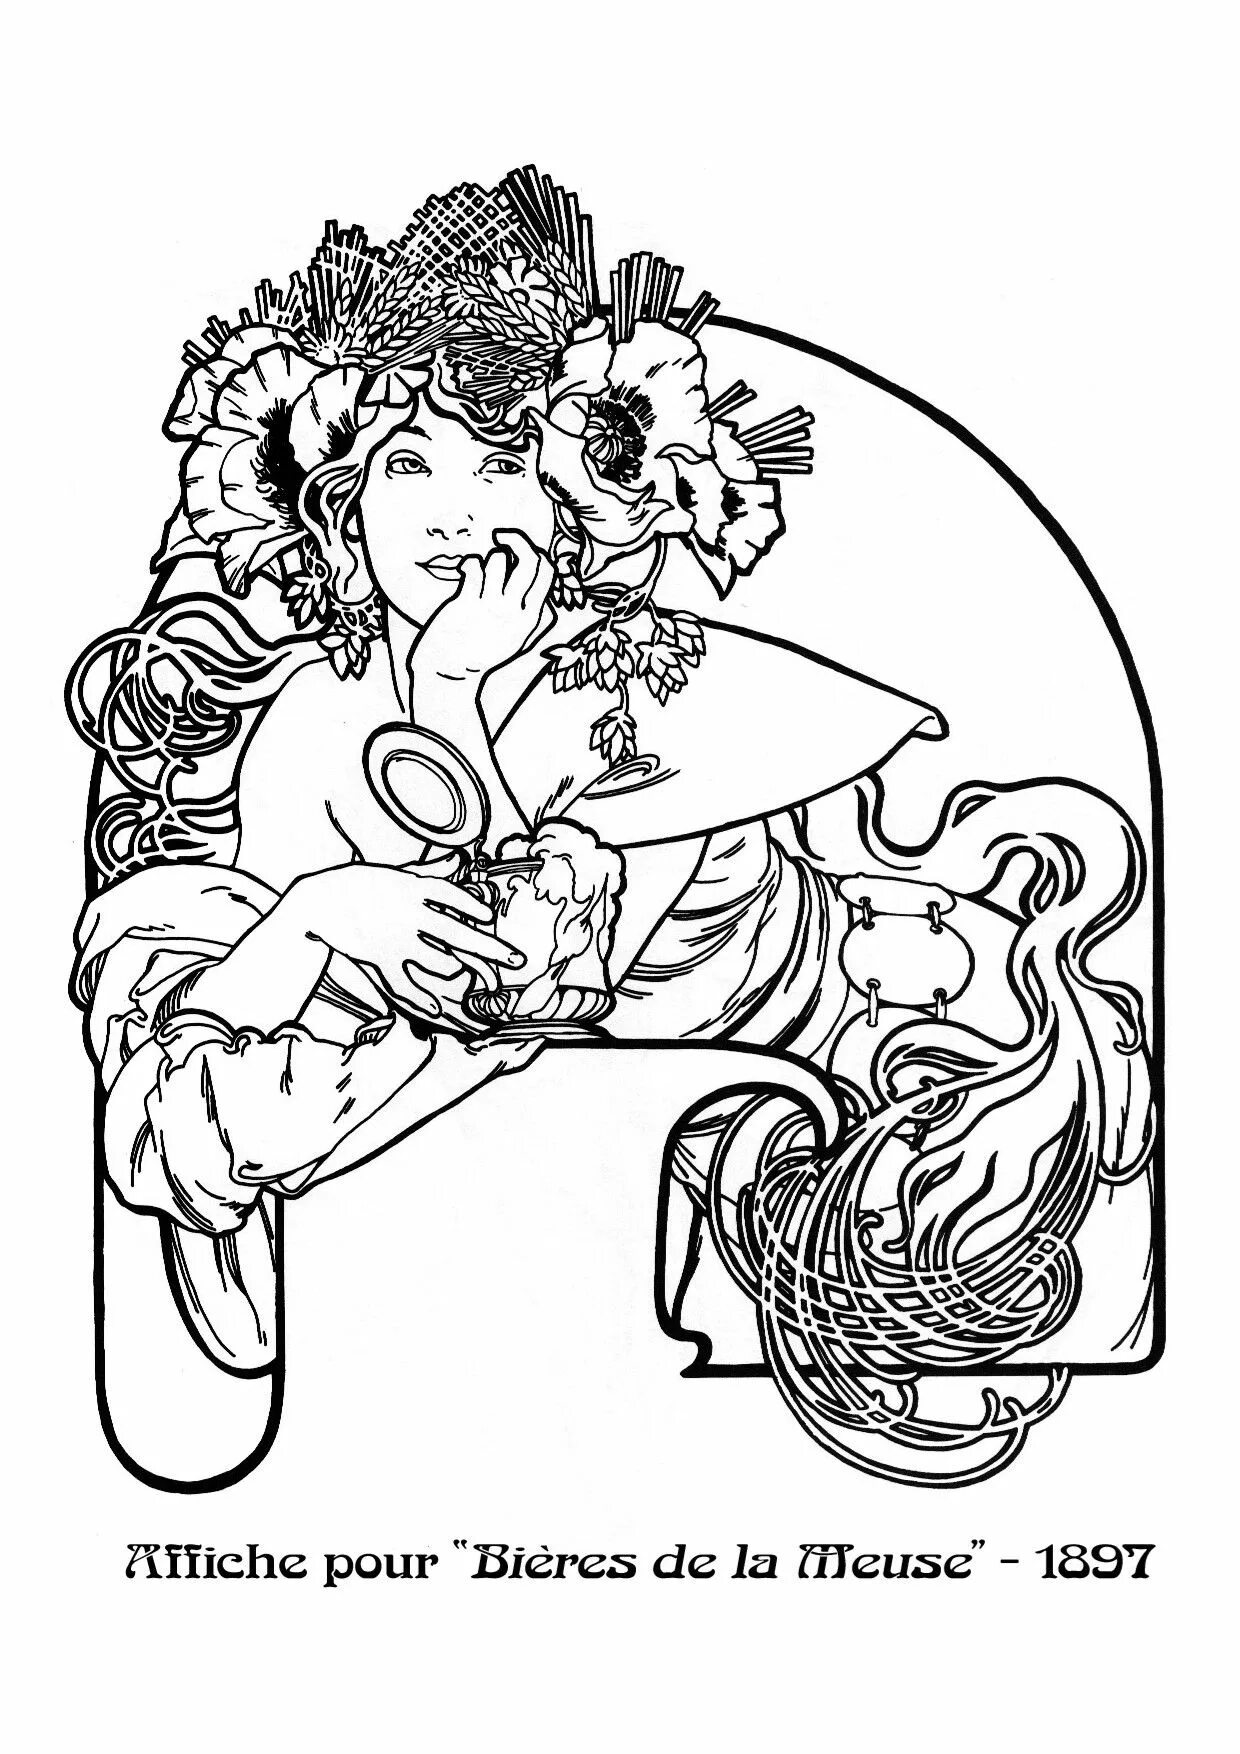 Colorful Alphonse Mucha coloring book